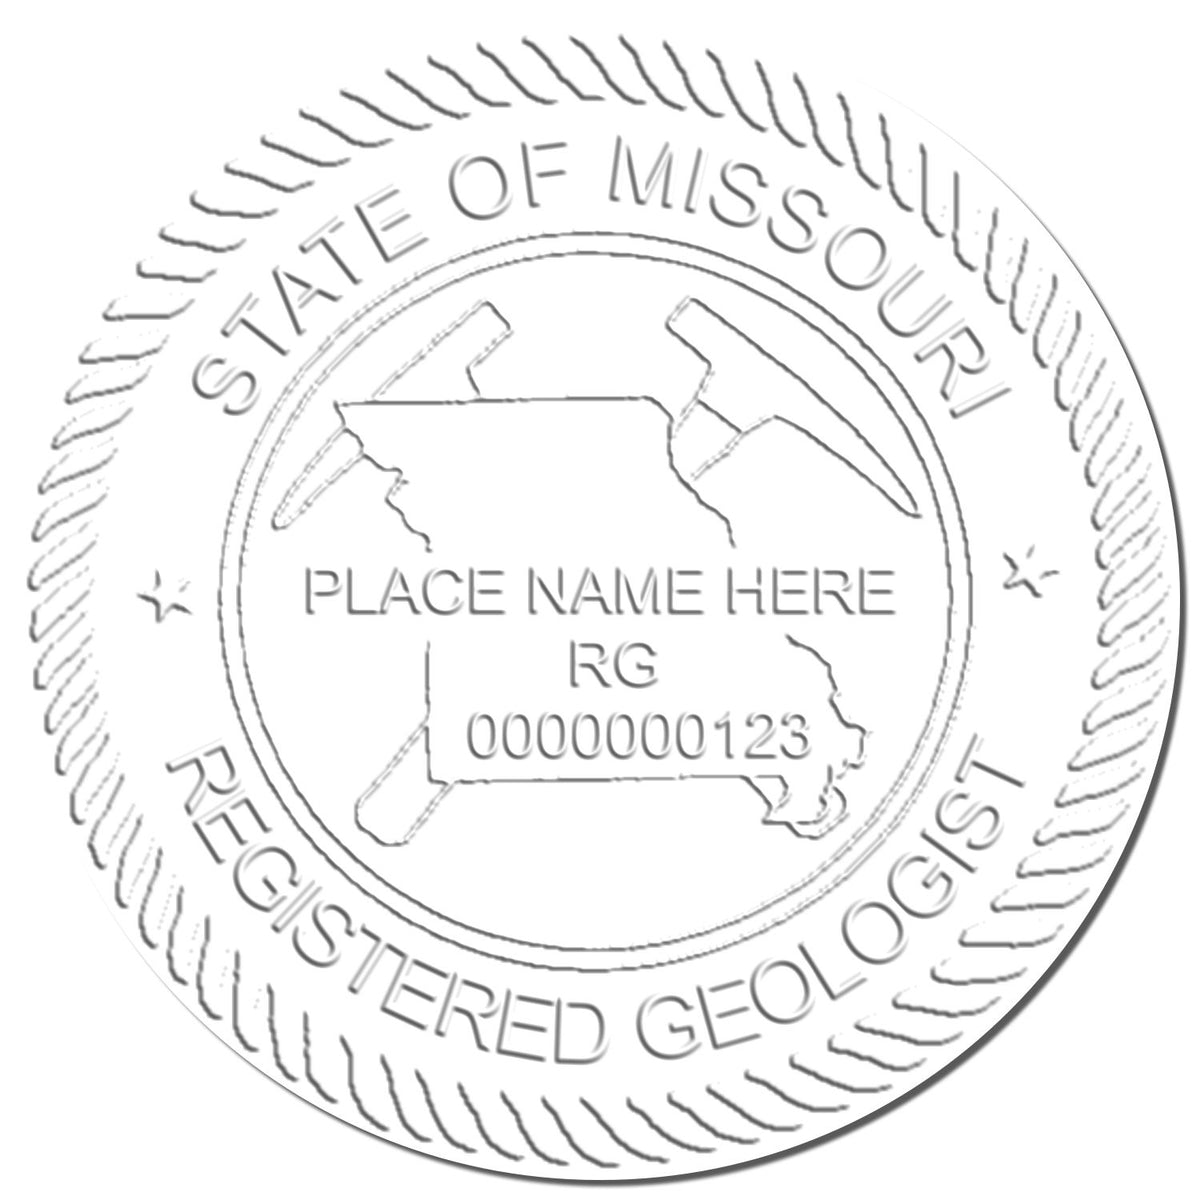 This paper is stamped with a sample imprint of the Handheld Missouri Professional Geologist Embosser, signifying its quality and reliability.